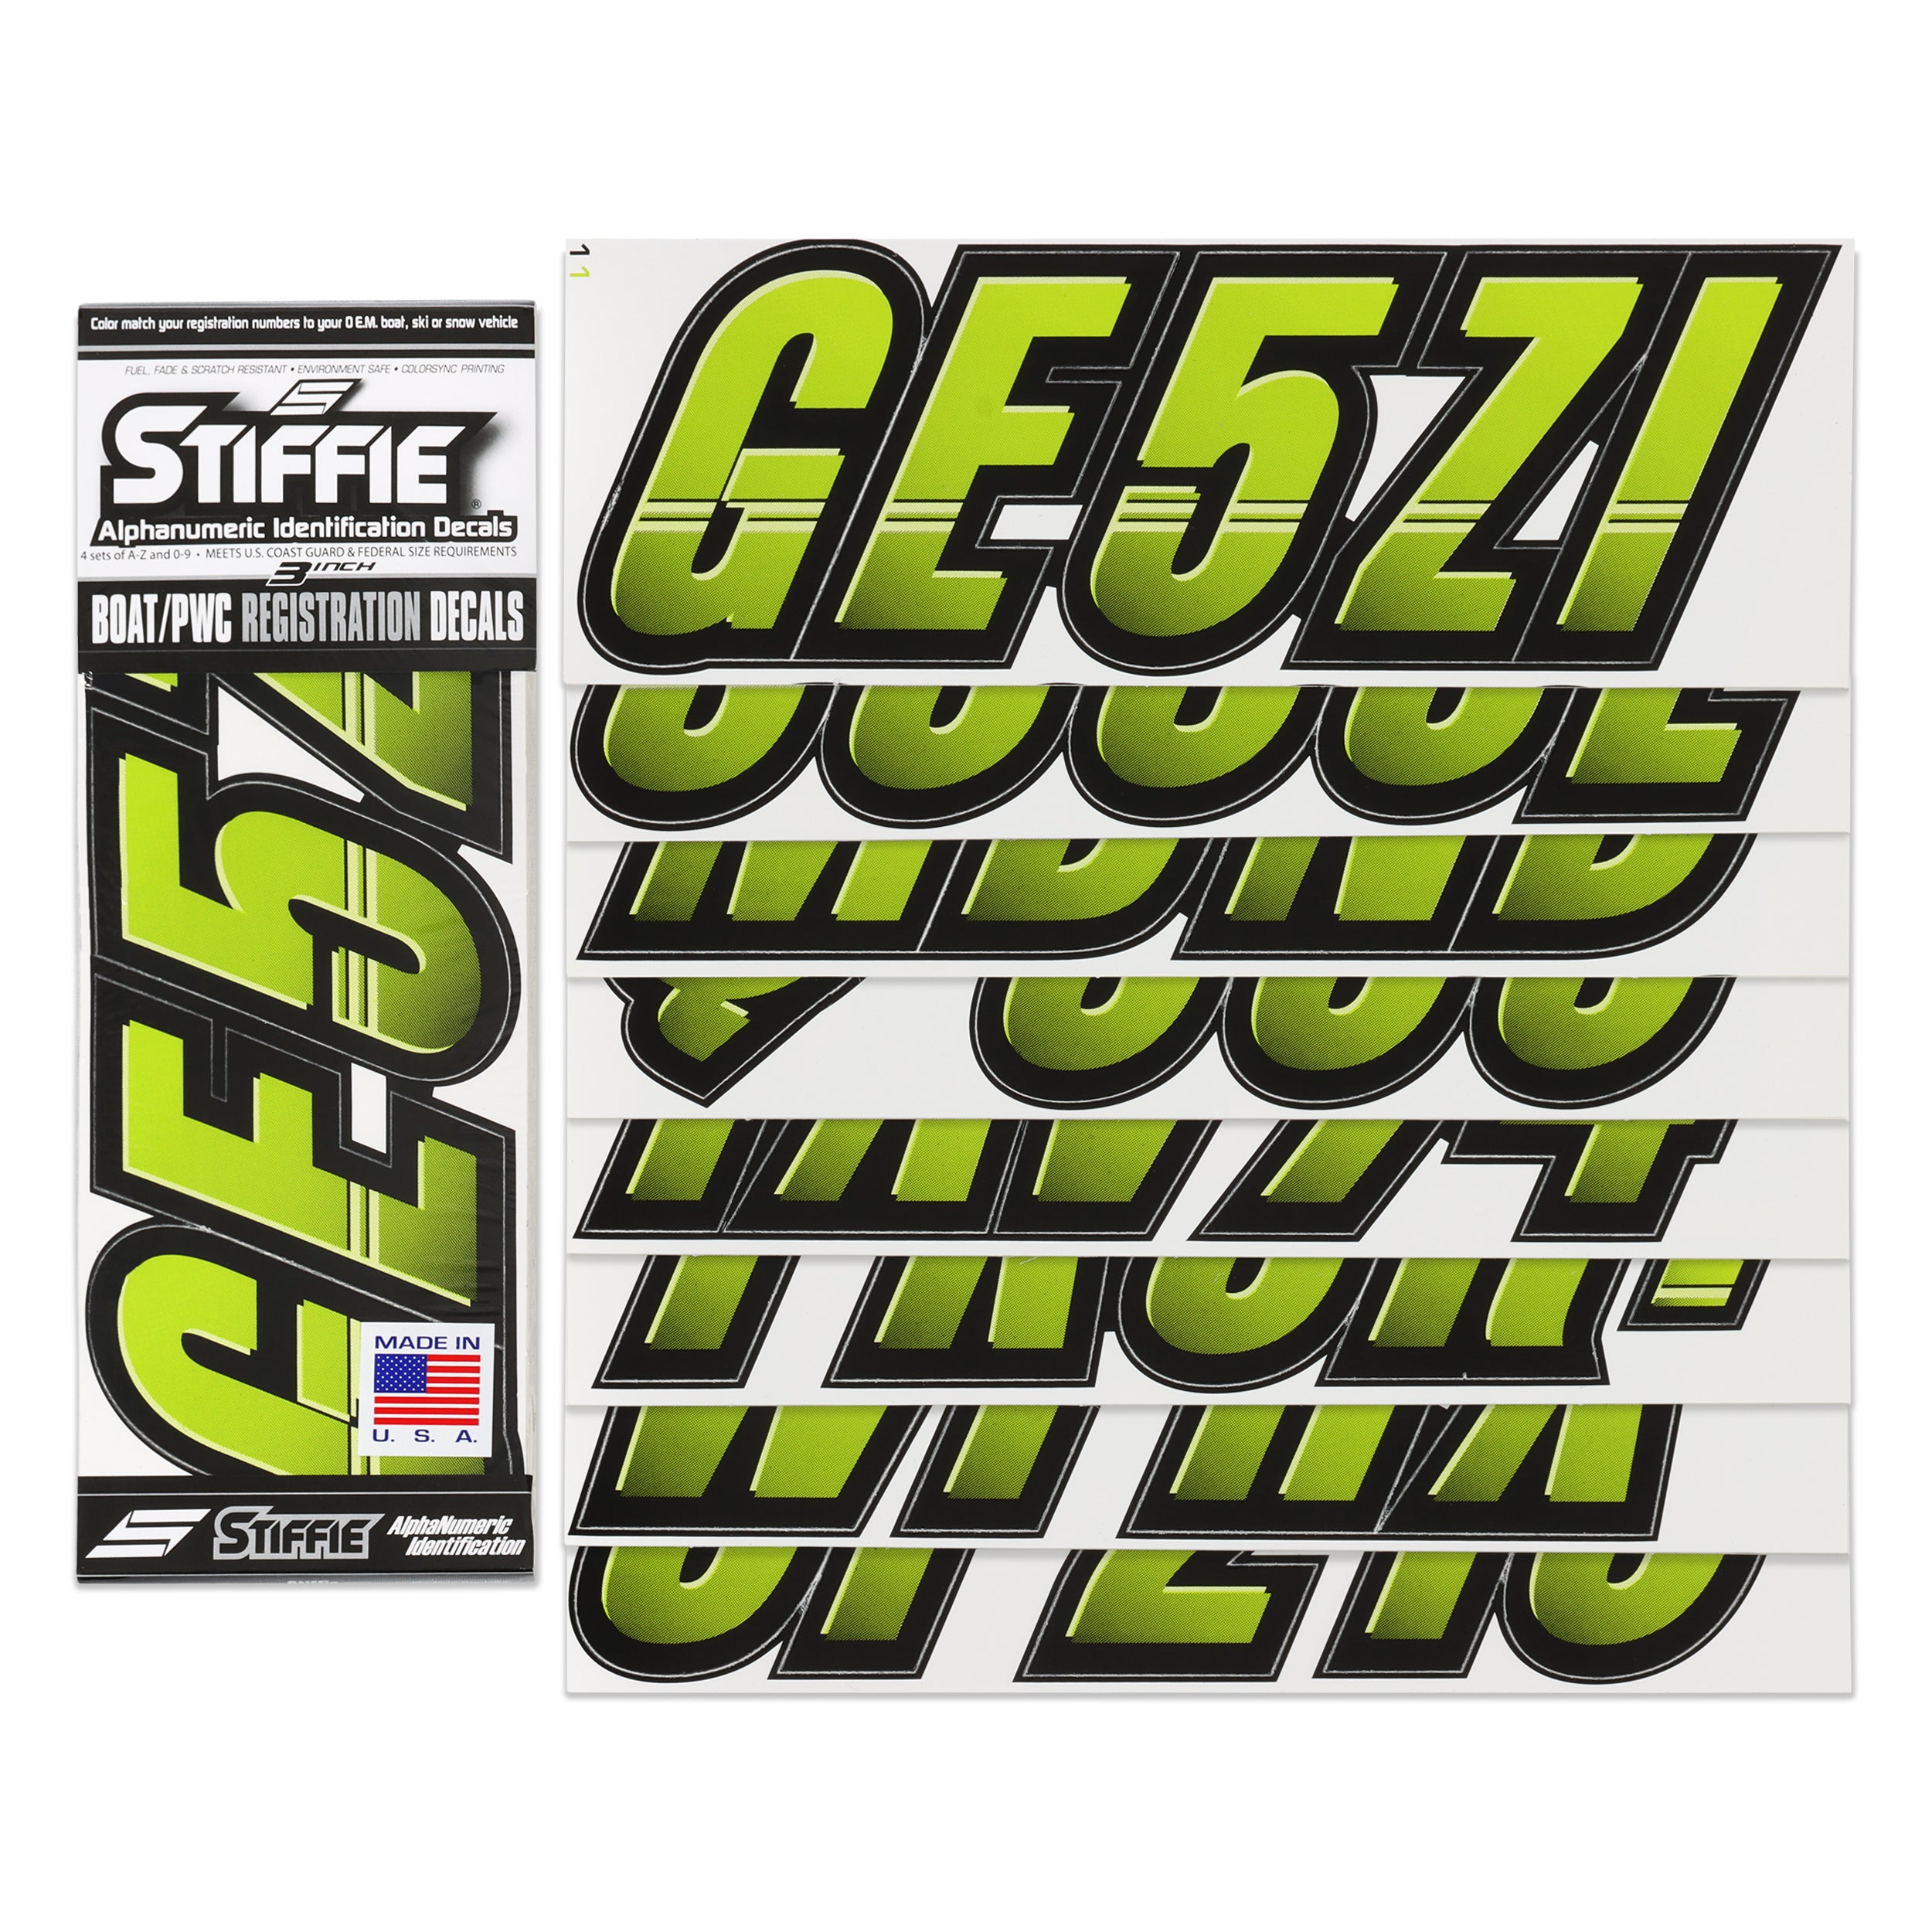 Stiffie Techtron Atomic Green/Black 3" Alpha-Numeric Registration Identification Numbers Stickers Decals for Boats & Personal Watercraft